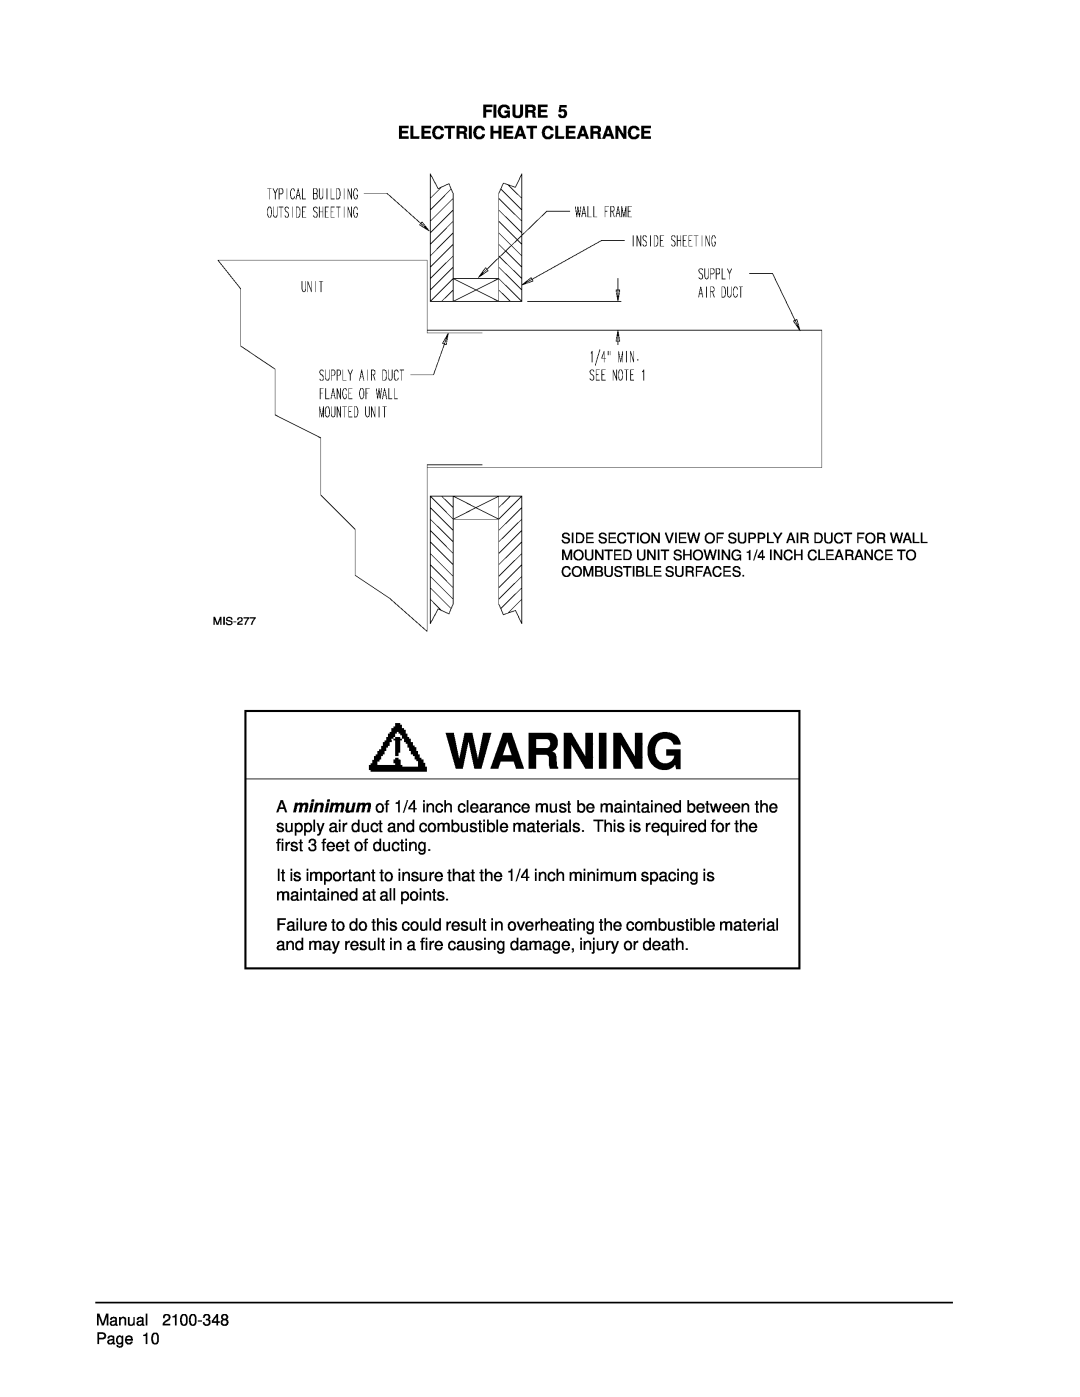 Bard WA6022, WA6023 Figure Electric Heat Clearance, Side Section View Of Supply Air Duct For Wall, Combustible Surfaces 